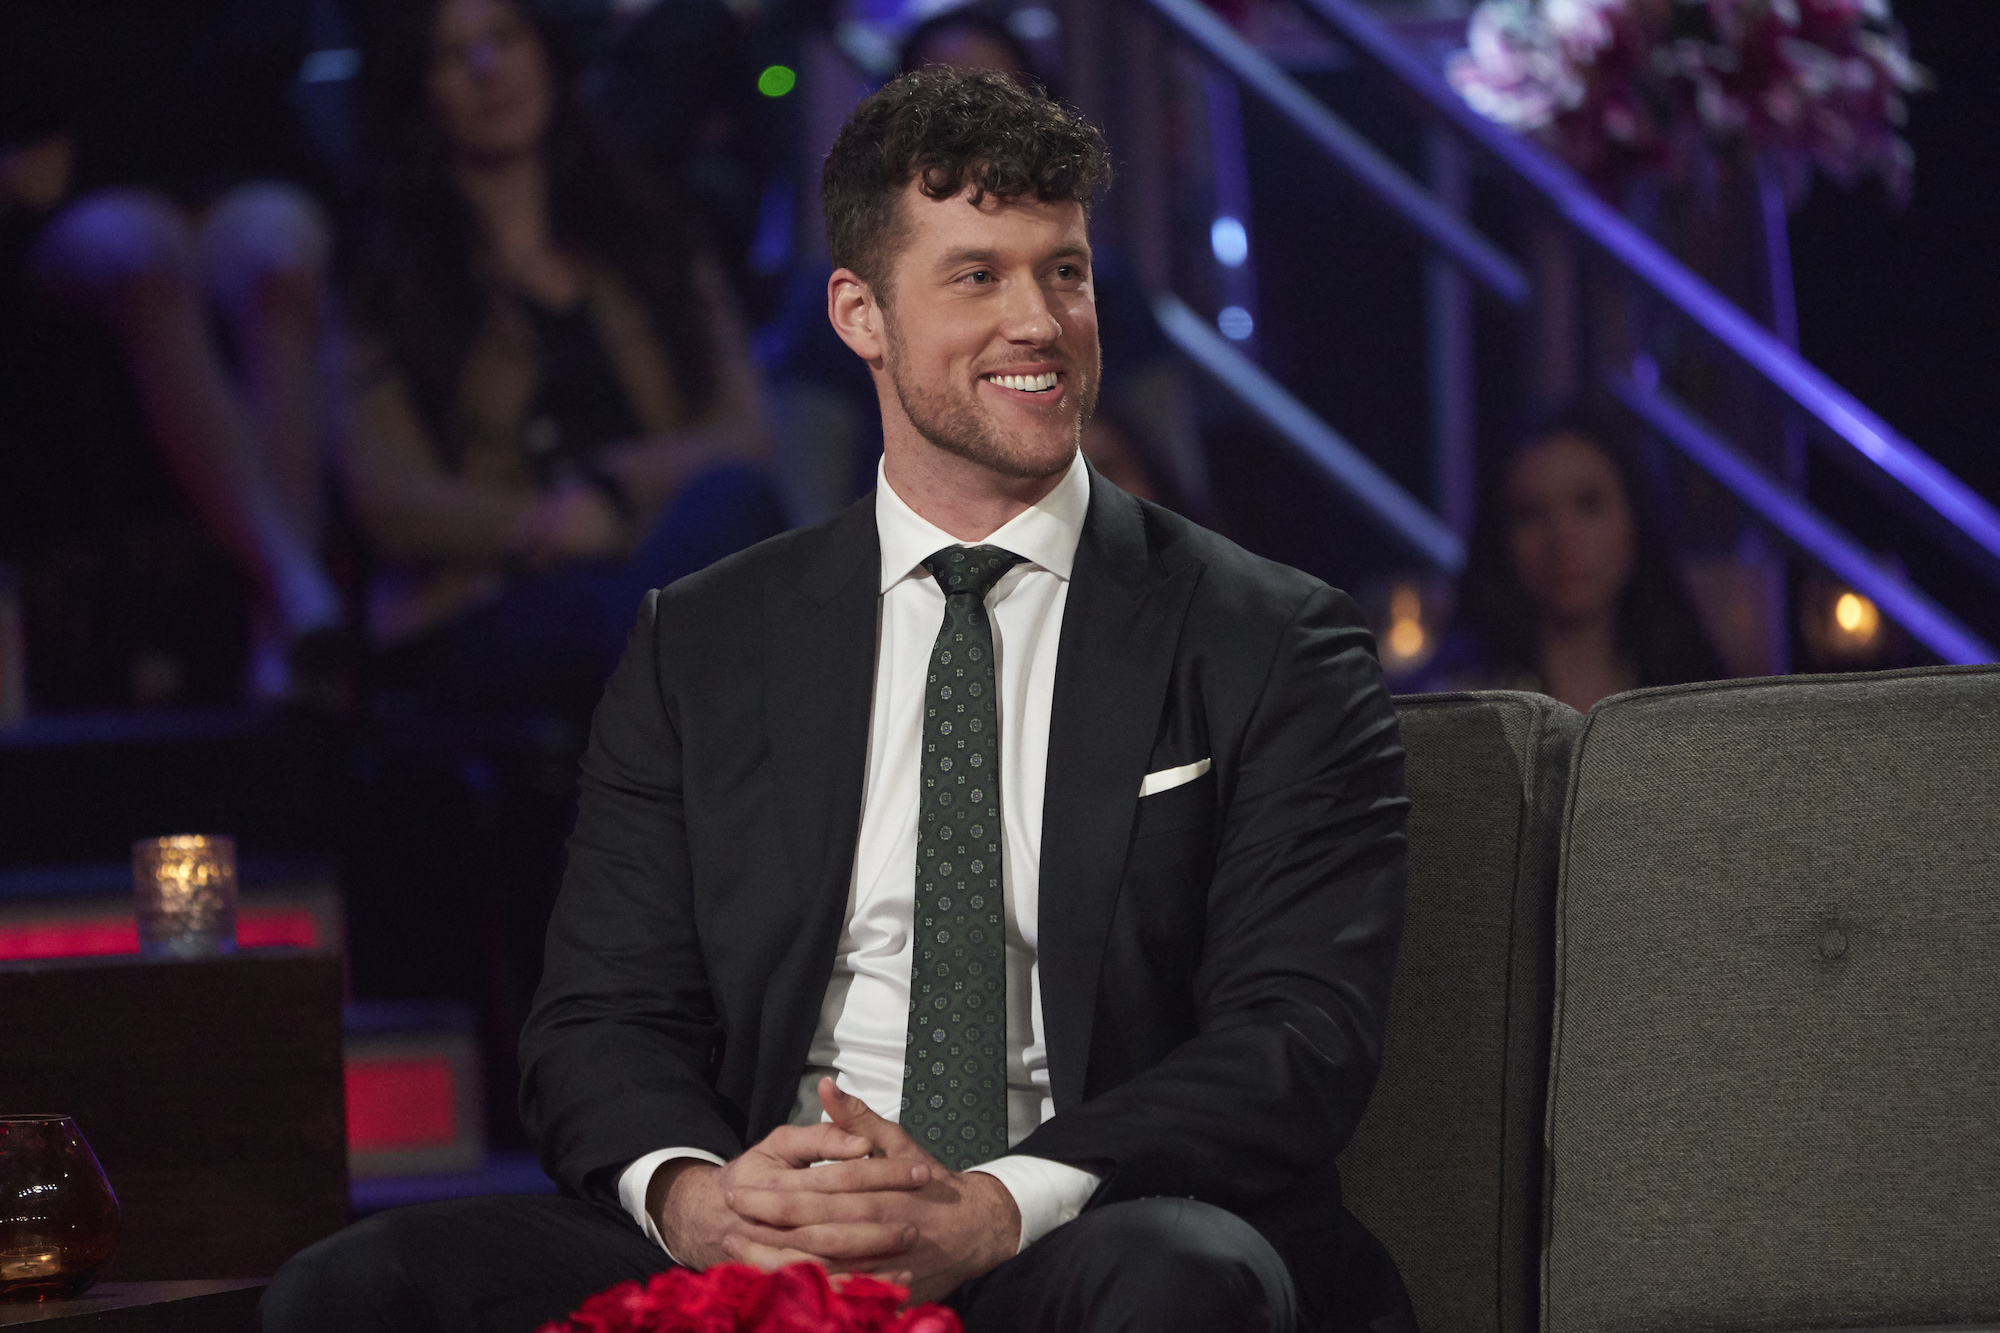 'The Bachelor' star Clayton Echard wearing a suit at the 'Women Tell All' taping.